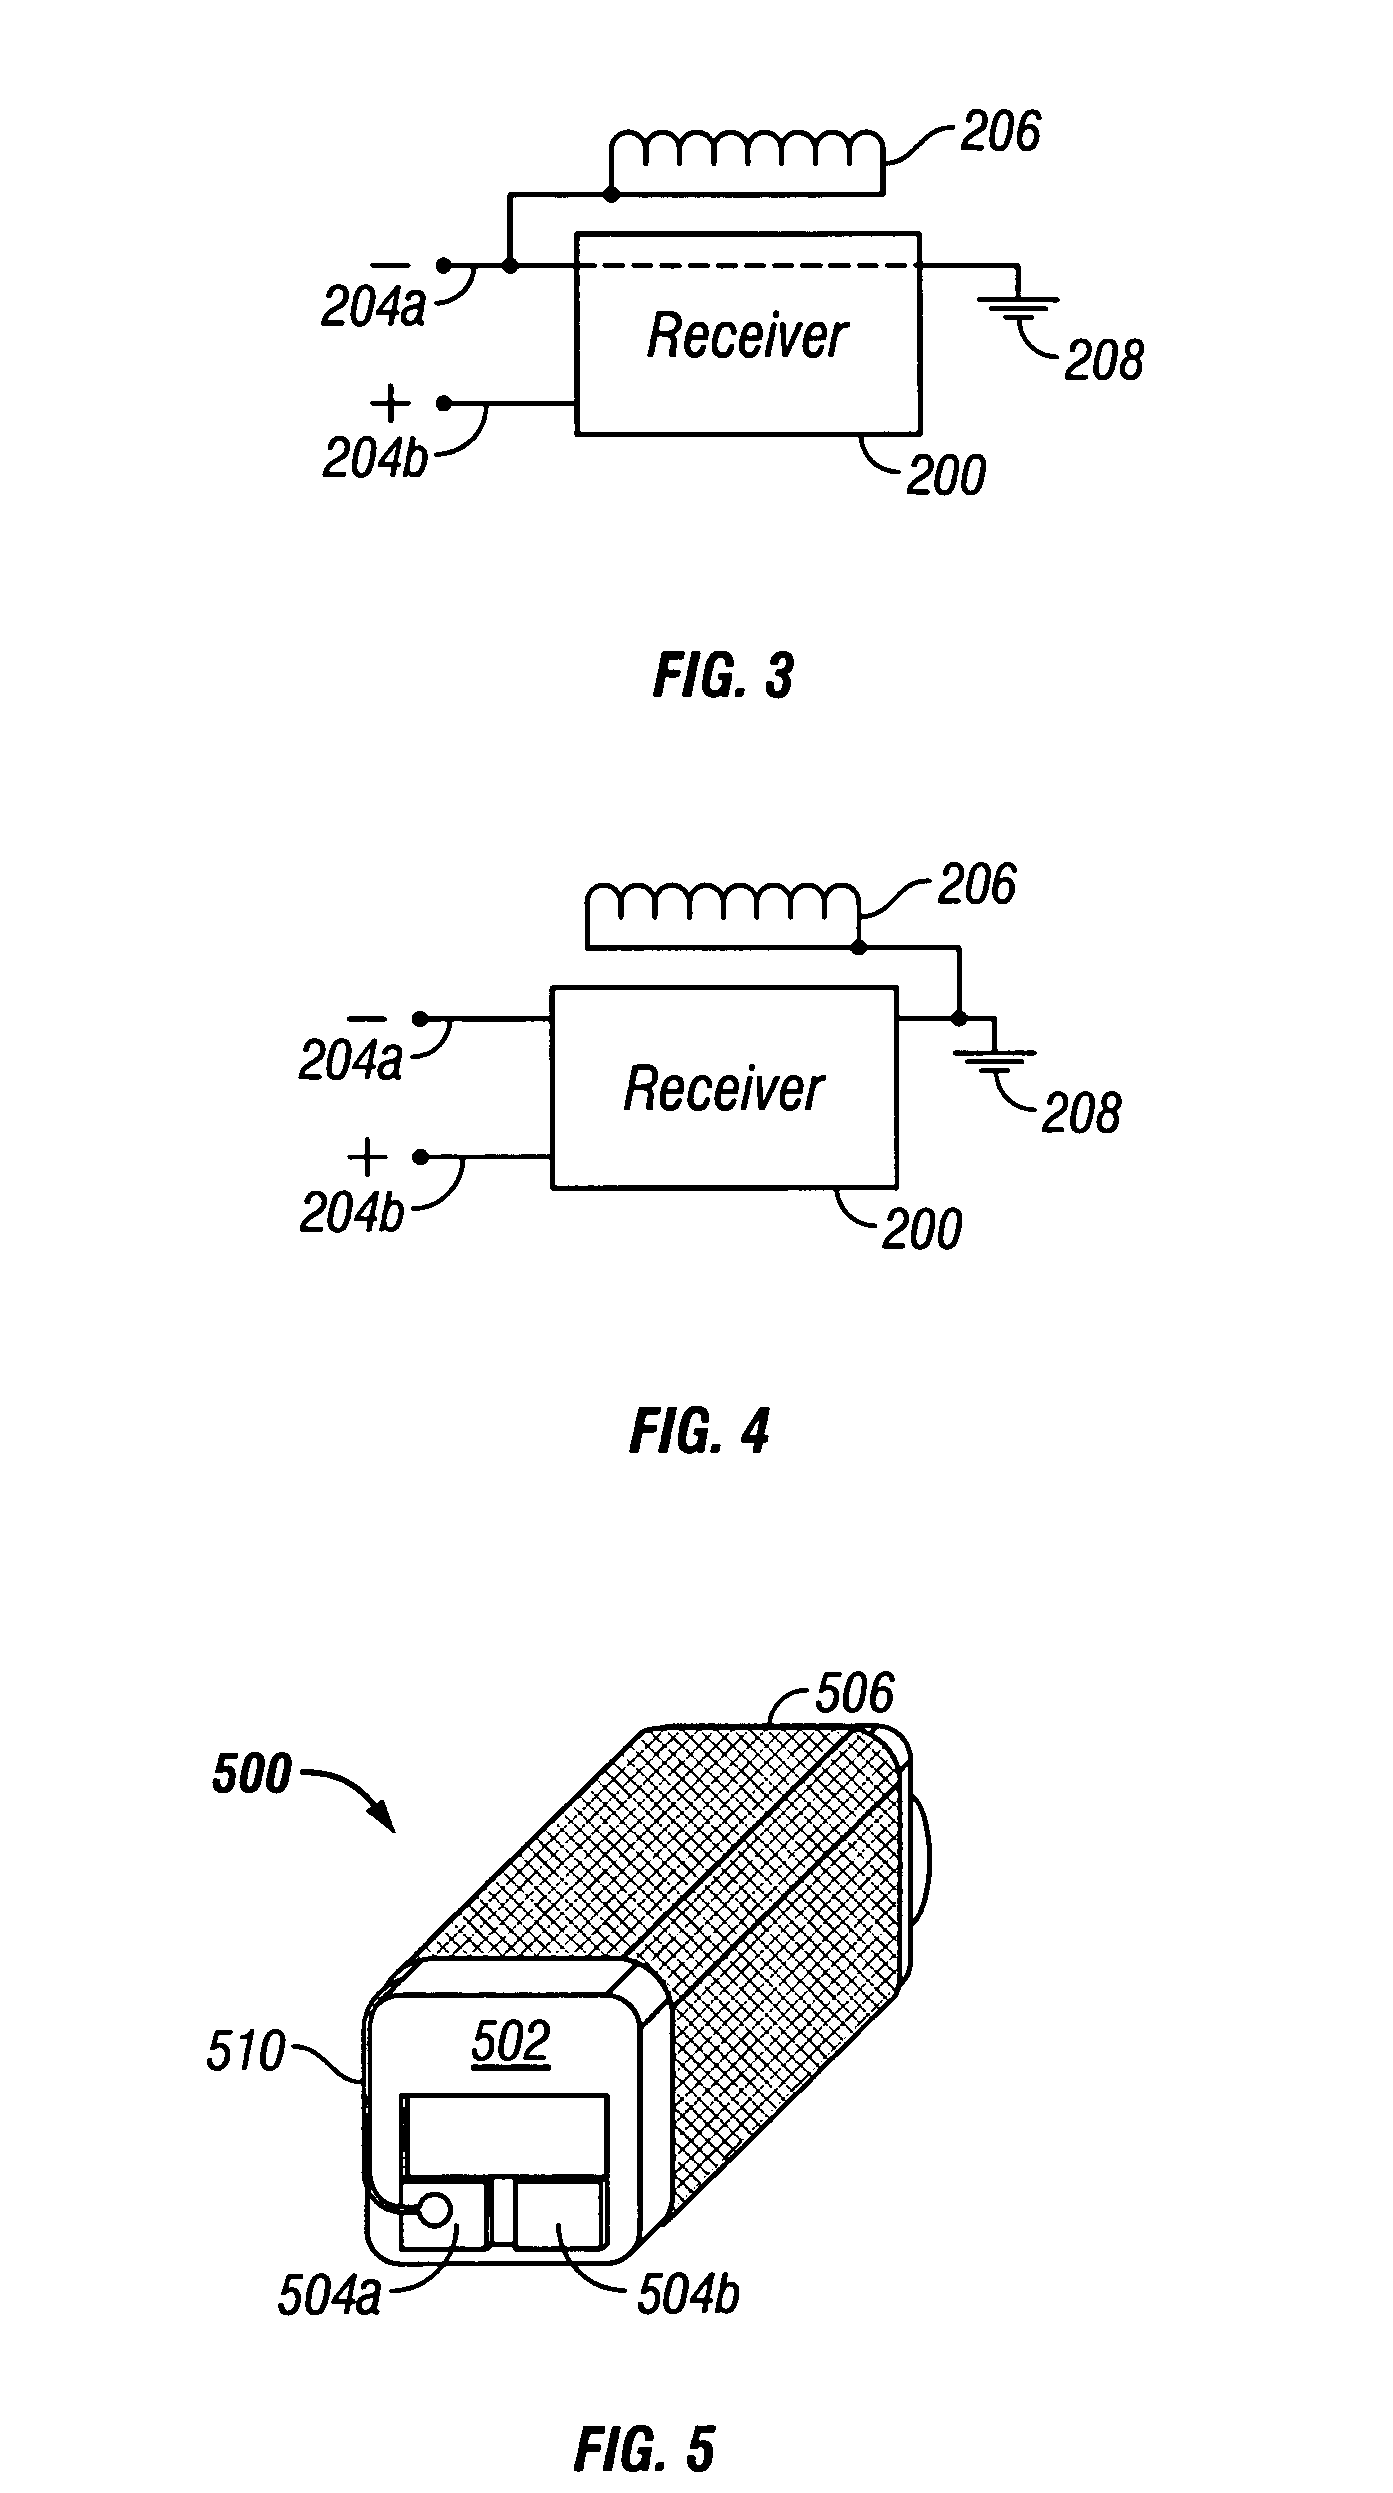 Radio frequency shielding for receivers within hearing aids and listening devices